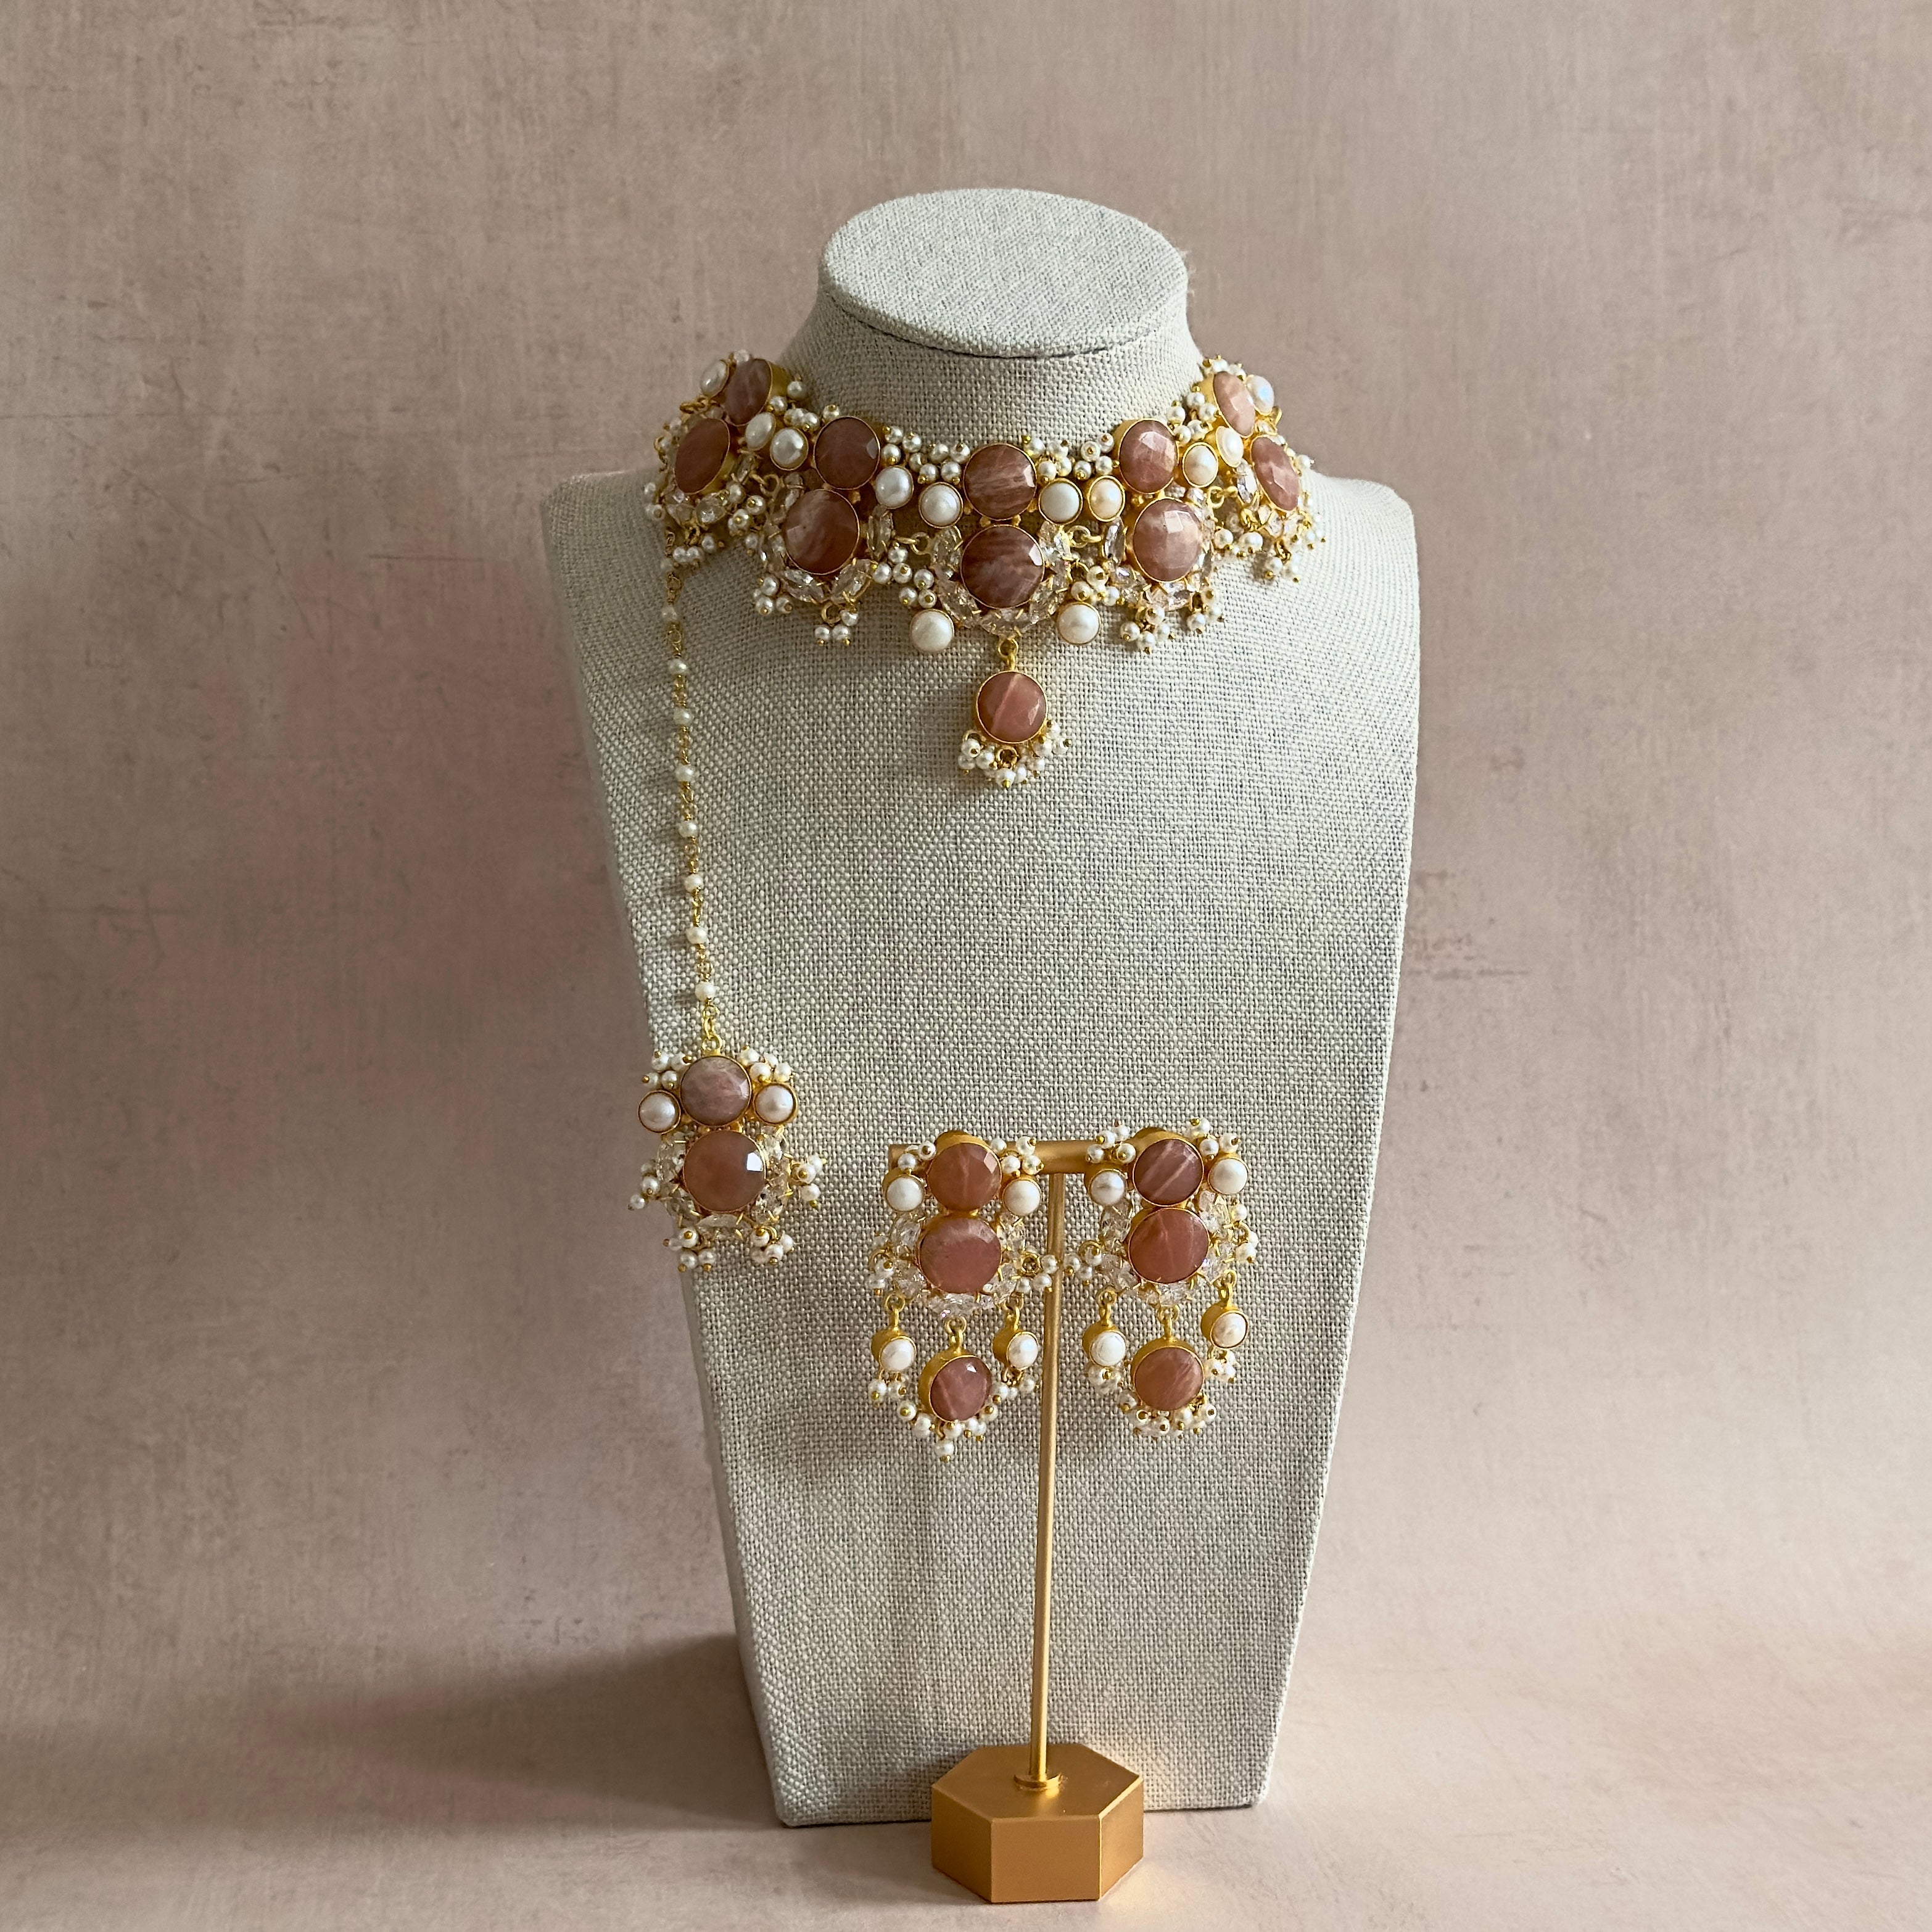 Elevate your look with our Havana Peach Choker Set. This stunning statement set features beautiful peachy brown hues adorned with lustrous freshwater pearls and sparkling cubic zirconia. The adjustable chain ensures a perfect fit, and it comes complete with matching earrings and tikka. Indulge in luxury and sophistication with this exquisite set.